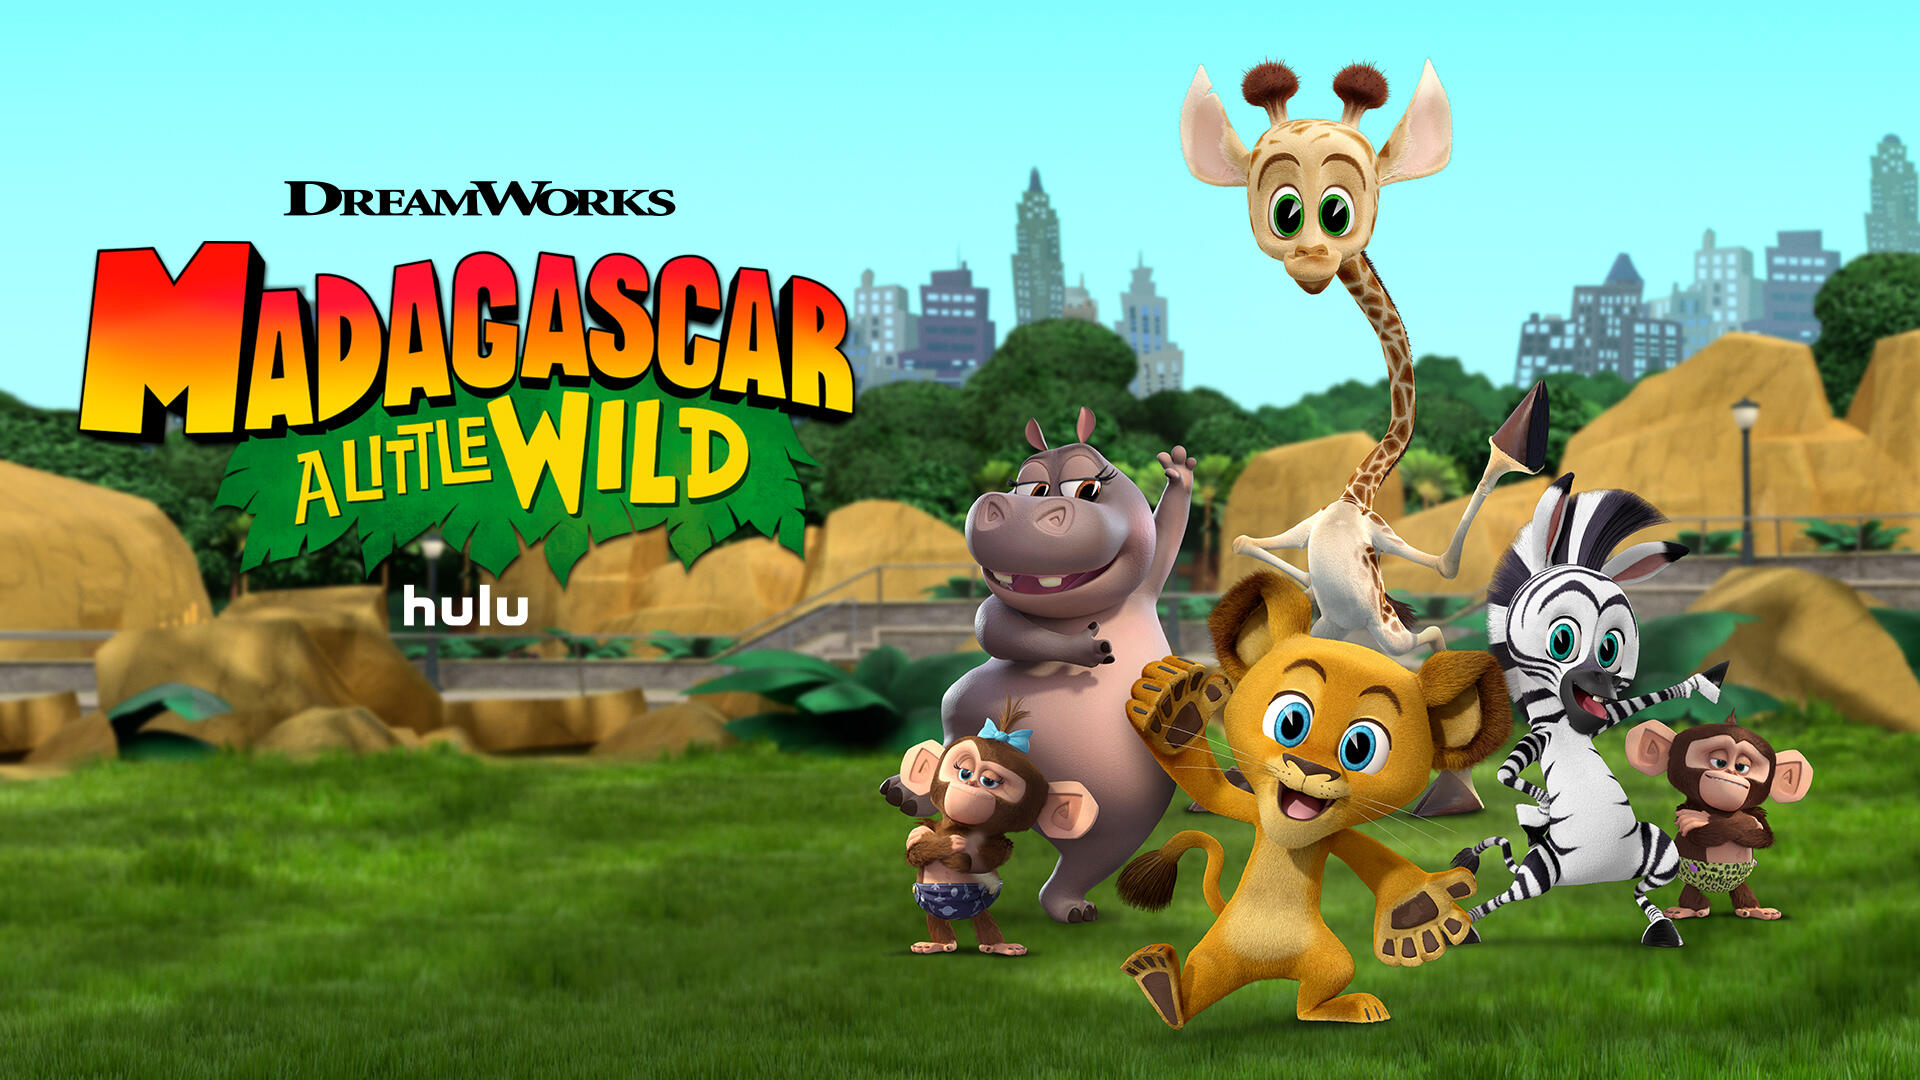 Madagascar: A Little Wild -- Alex, Marty, Melman and Gloria step out of the comfort of home to find adventure in exotic places, like the wilds of New Jersey! They’ll meet up with old friends, including Bartholomew the Bat and Lala the now-grown Frog. And they’ll make new friends, like a mysterious salsa-dancing parrot who Gloria is determined to help, an adorable but uncontrollable puppy who steals Marty’s heart, and a clever deaf girl whose conversation with Dave sends the gang on a city-wide adventure. And they’ll finally spend a day with the notorious Bill the Flamingo, who says he wants to be a friend, but may just turn out to be Alex’s worst enemy! (Courtesy of DreamWorks)